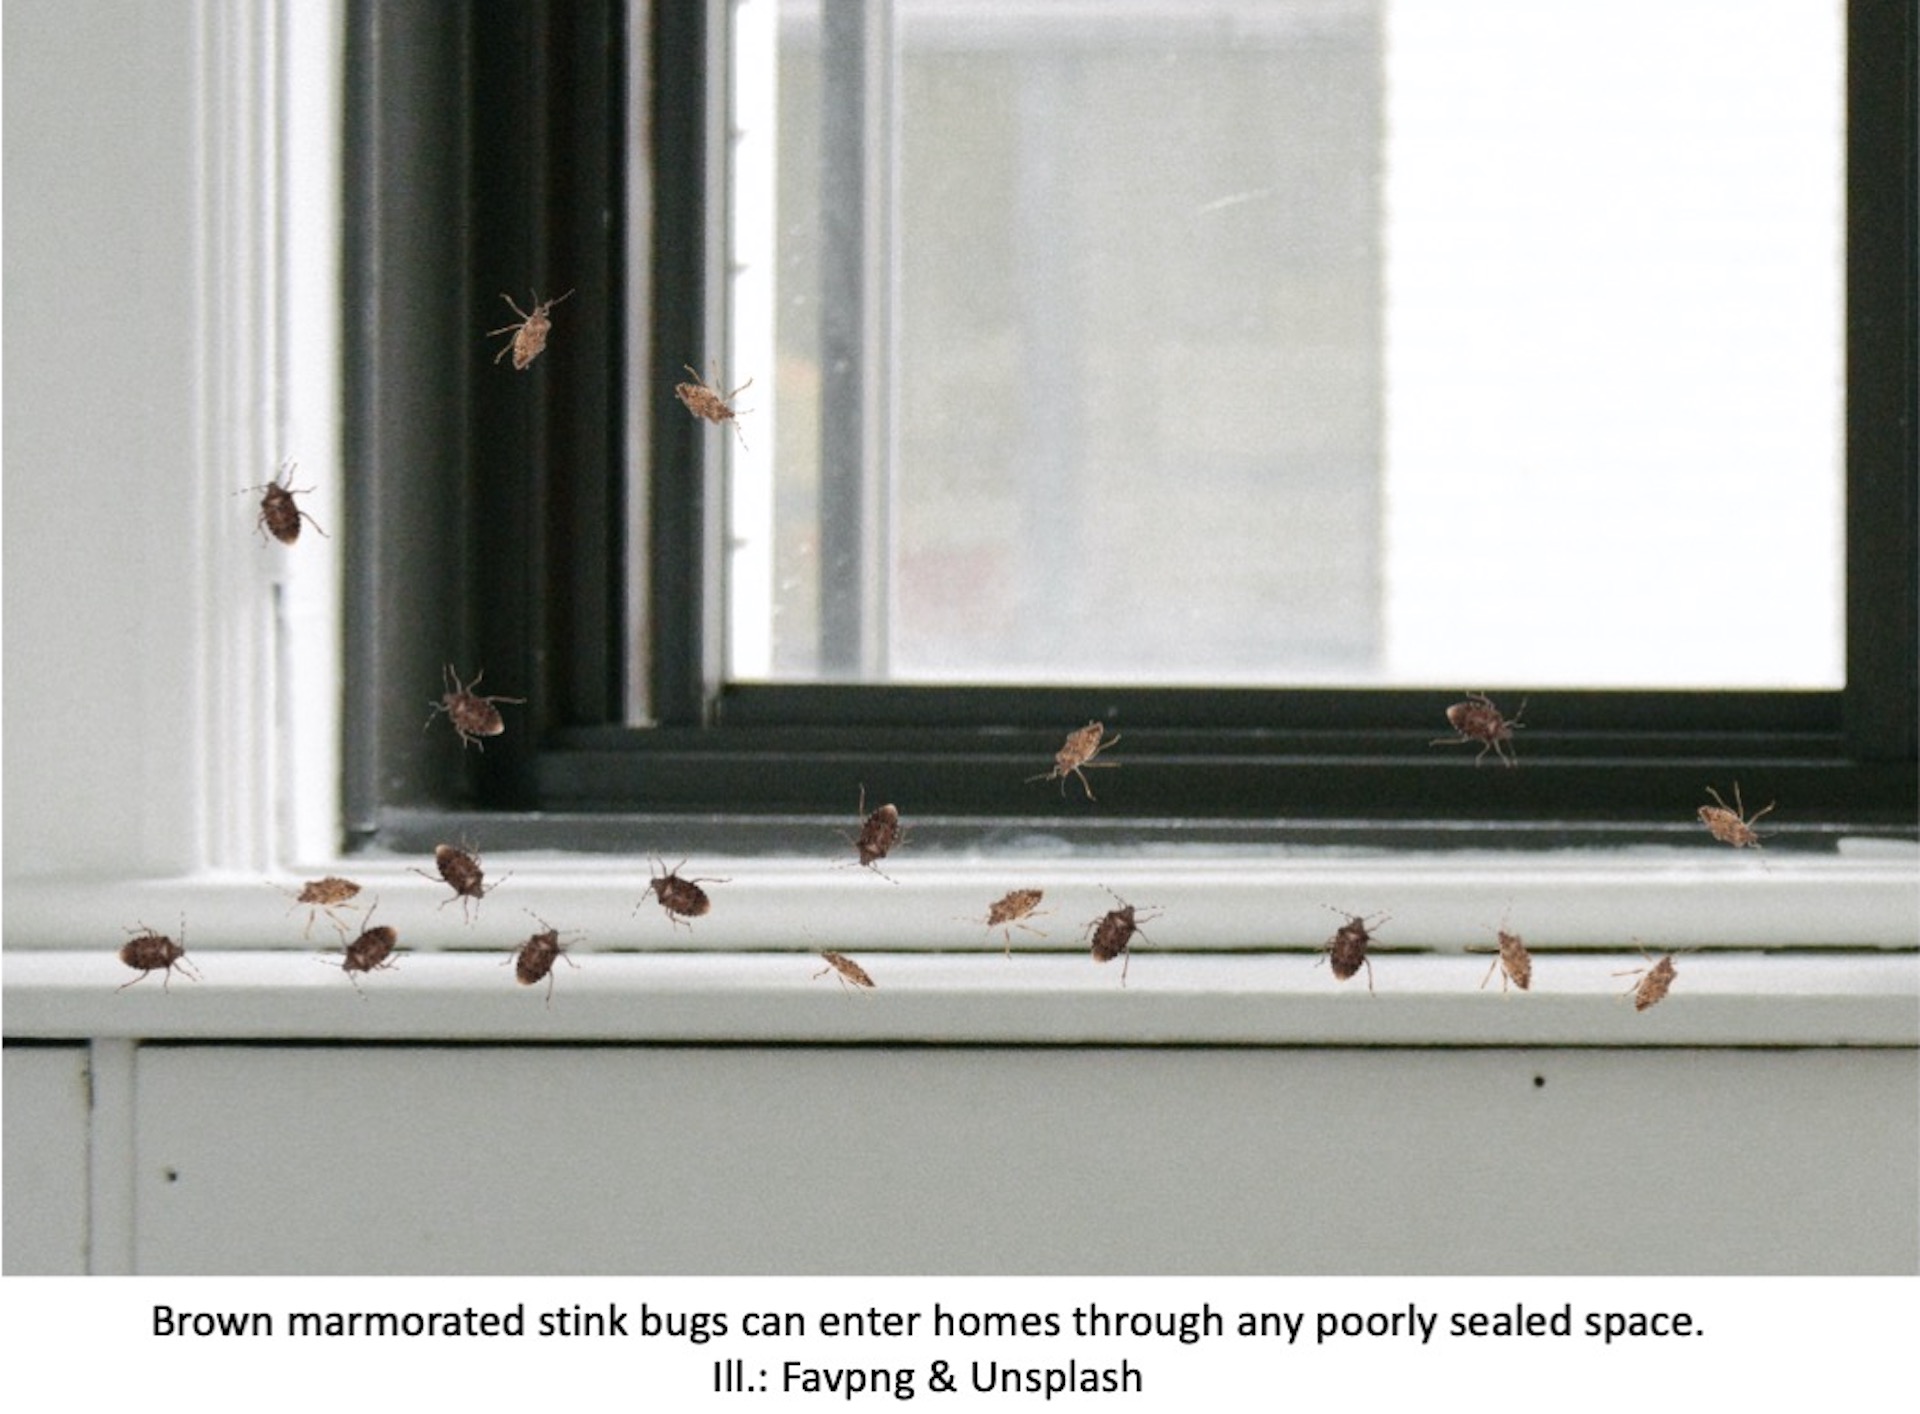 Brown marmorated stink bugs on a window ledge indoors.